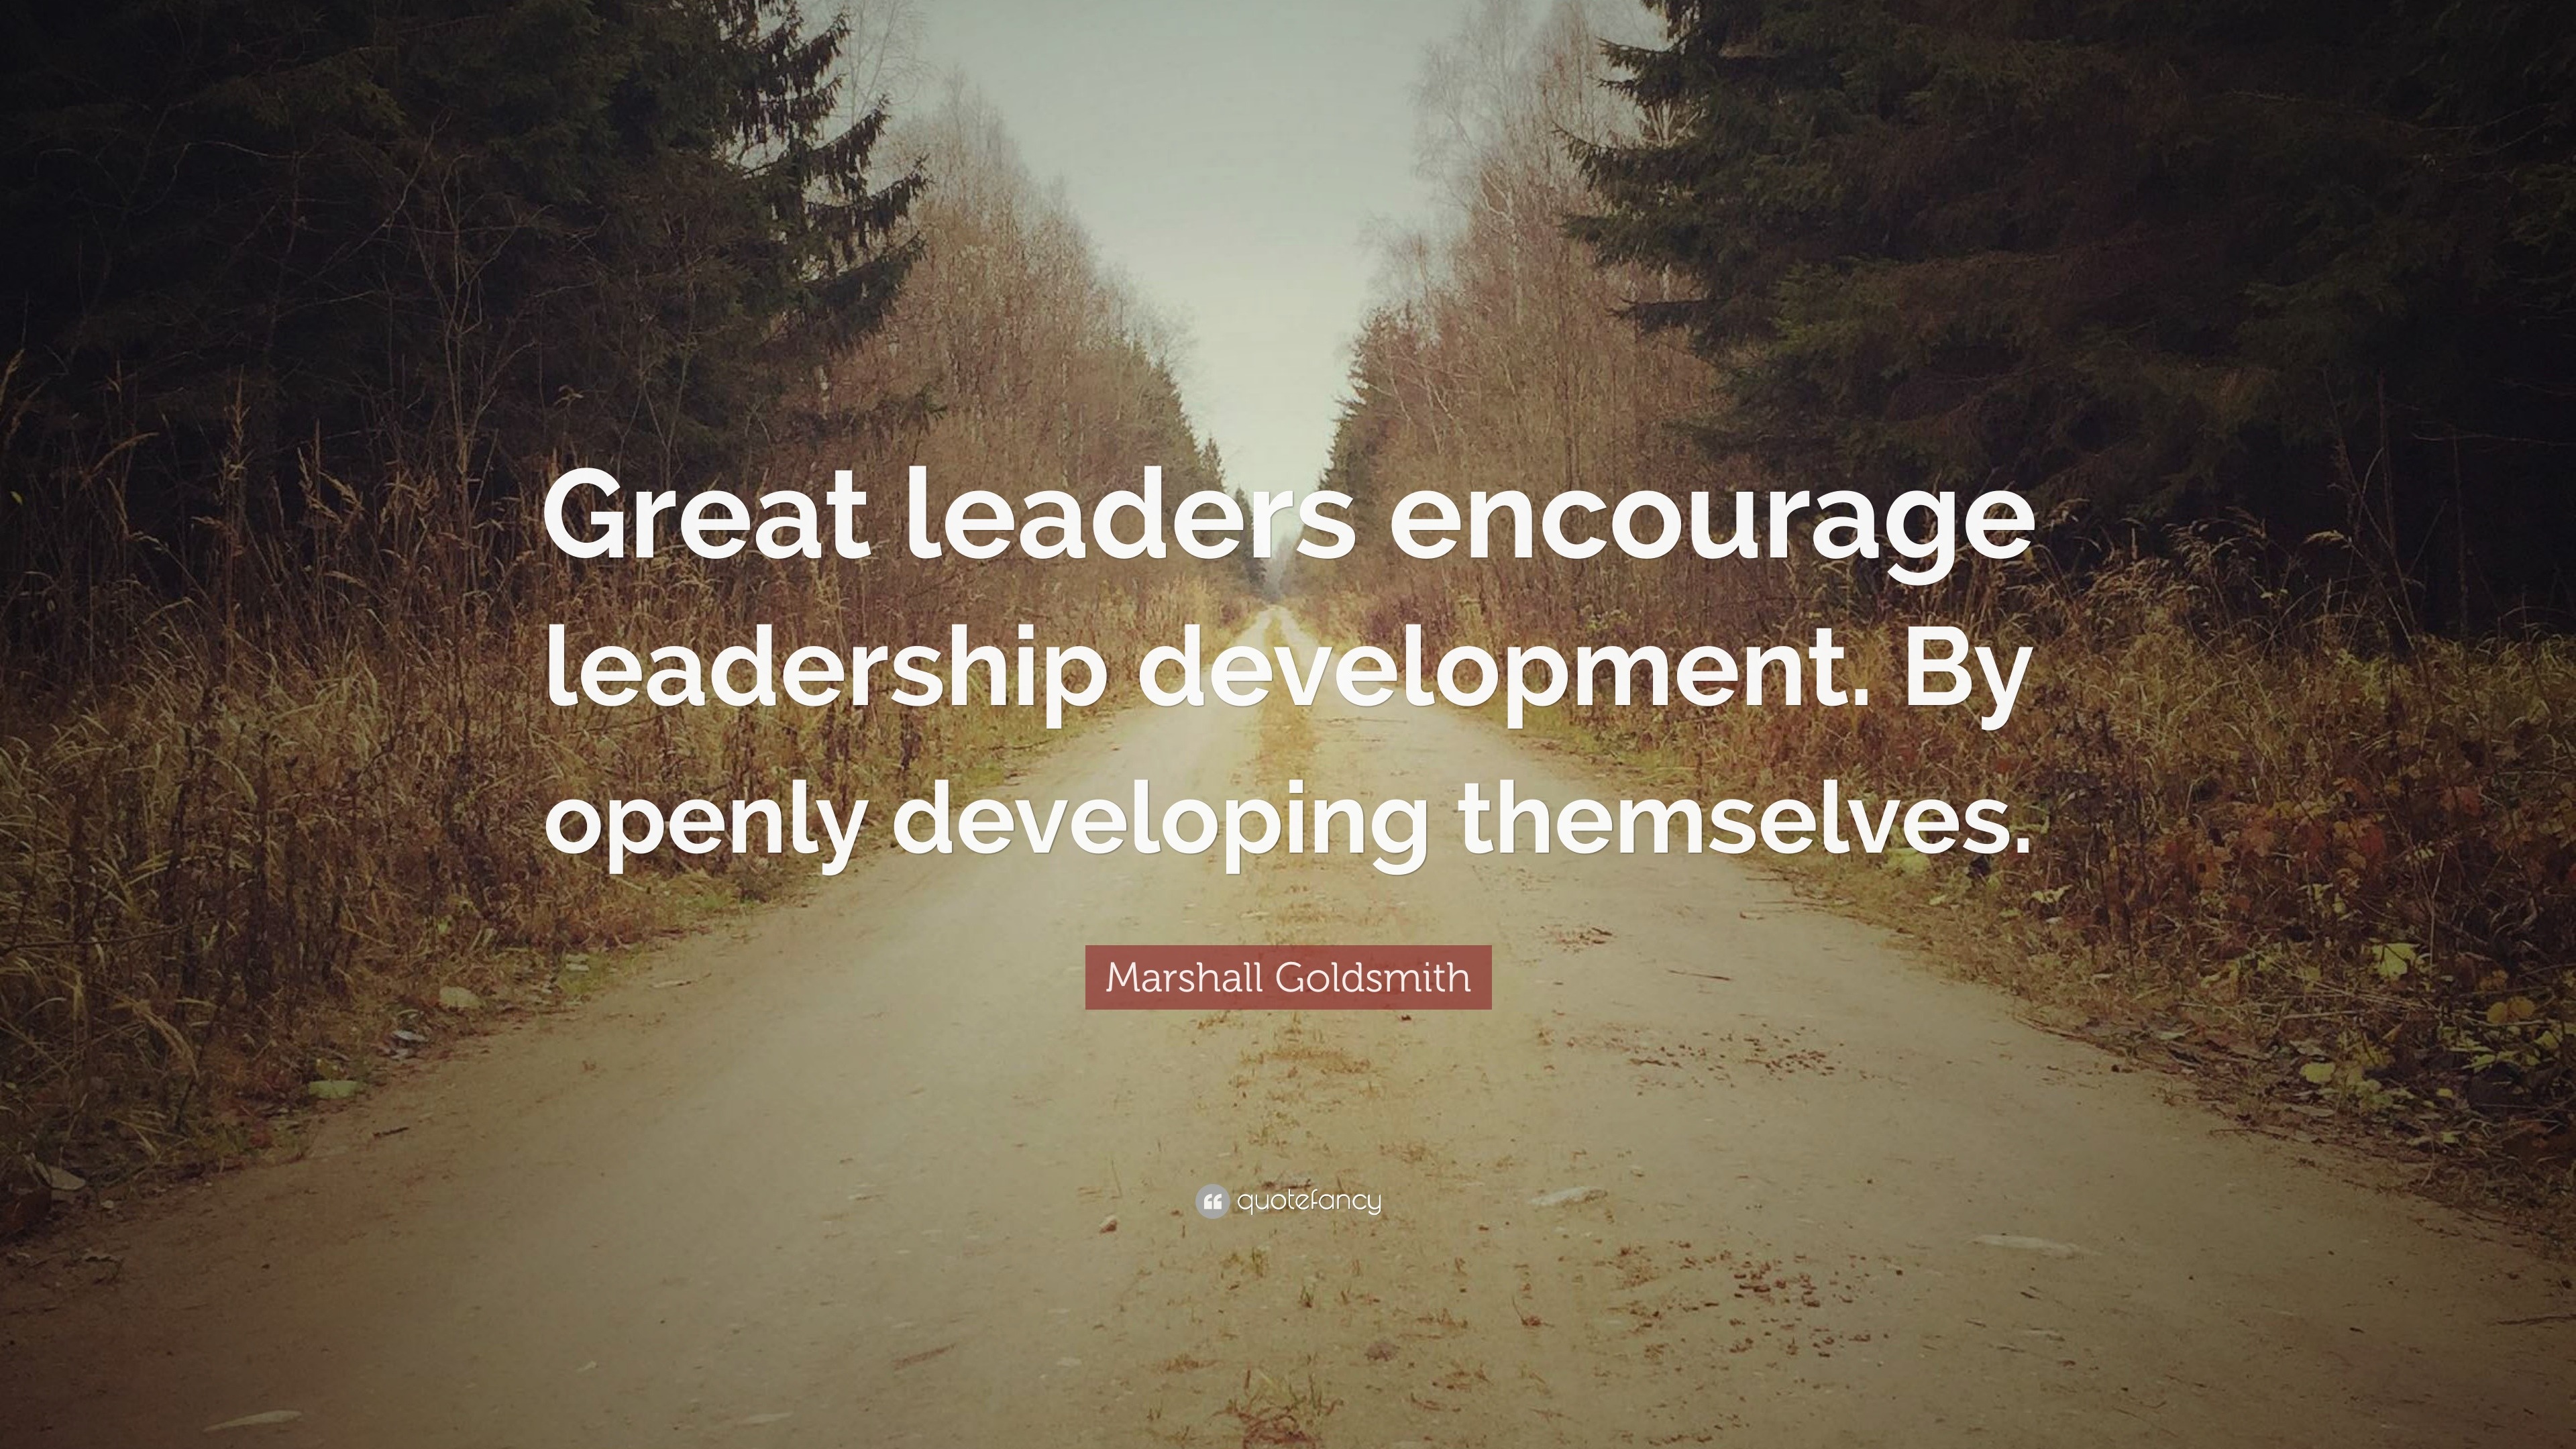 Leadership Quotes By Great Leaders - Lounge Threat